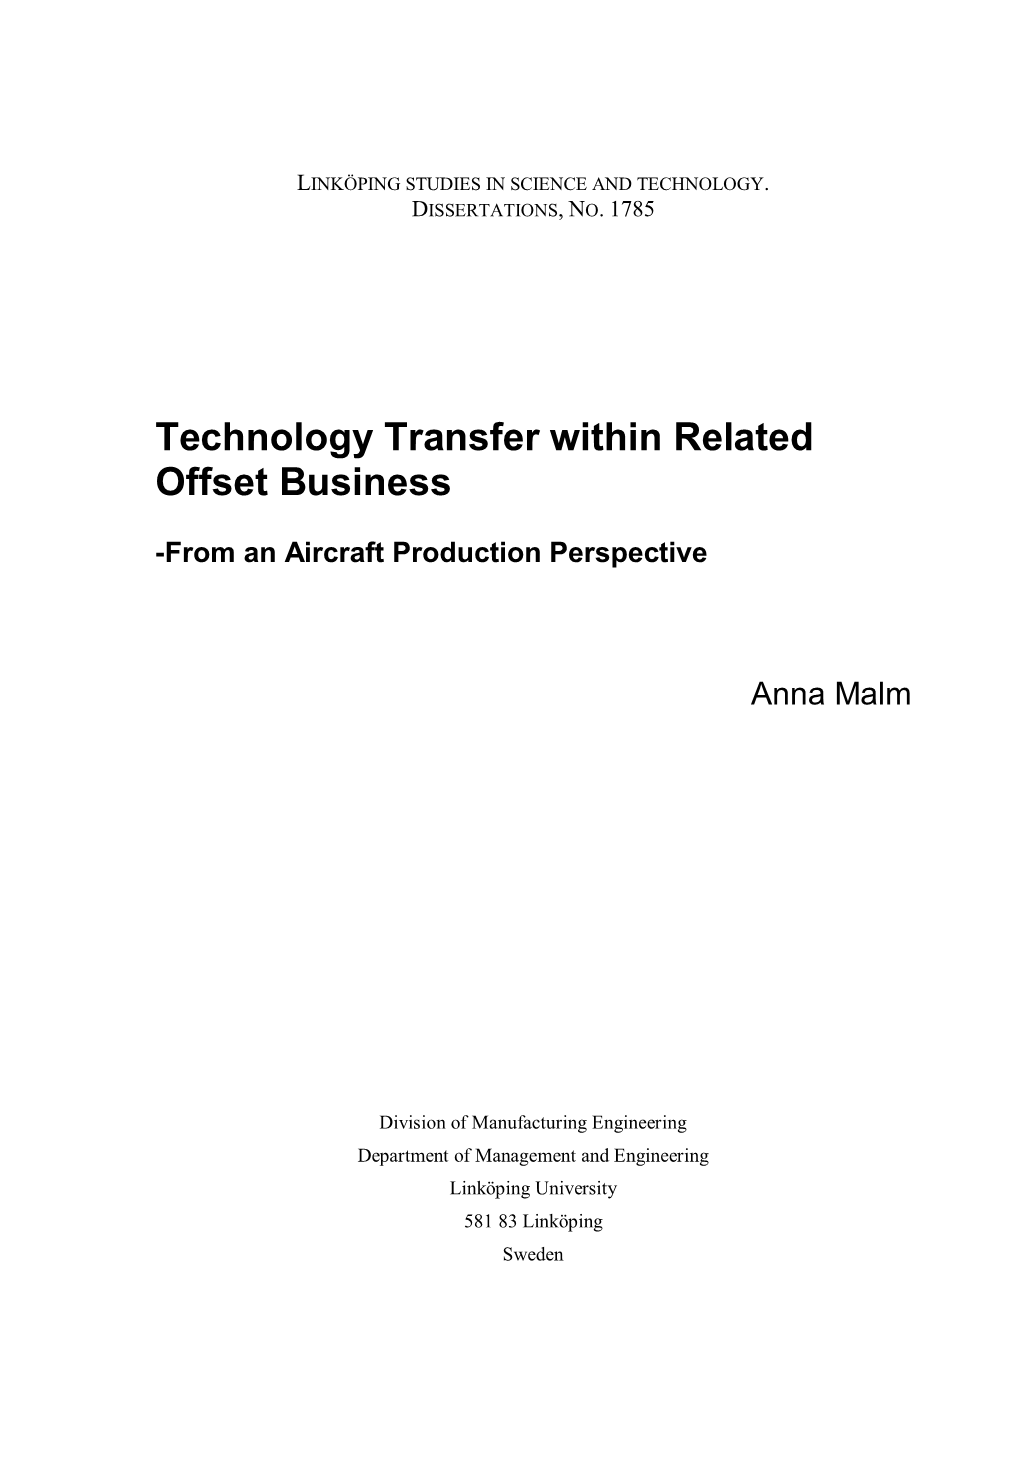 Technology Transfer Within Related Offset Business